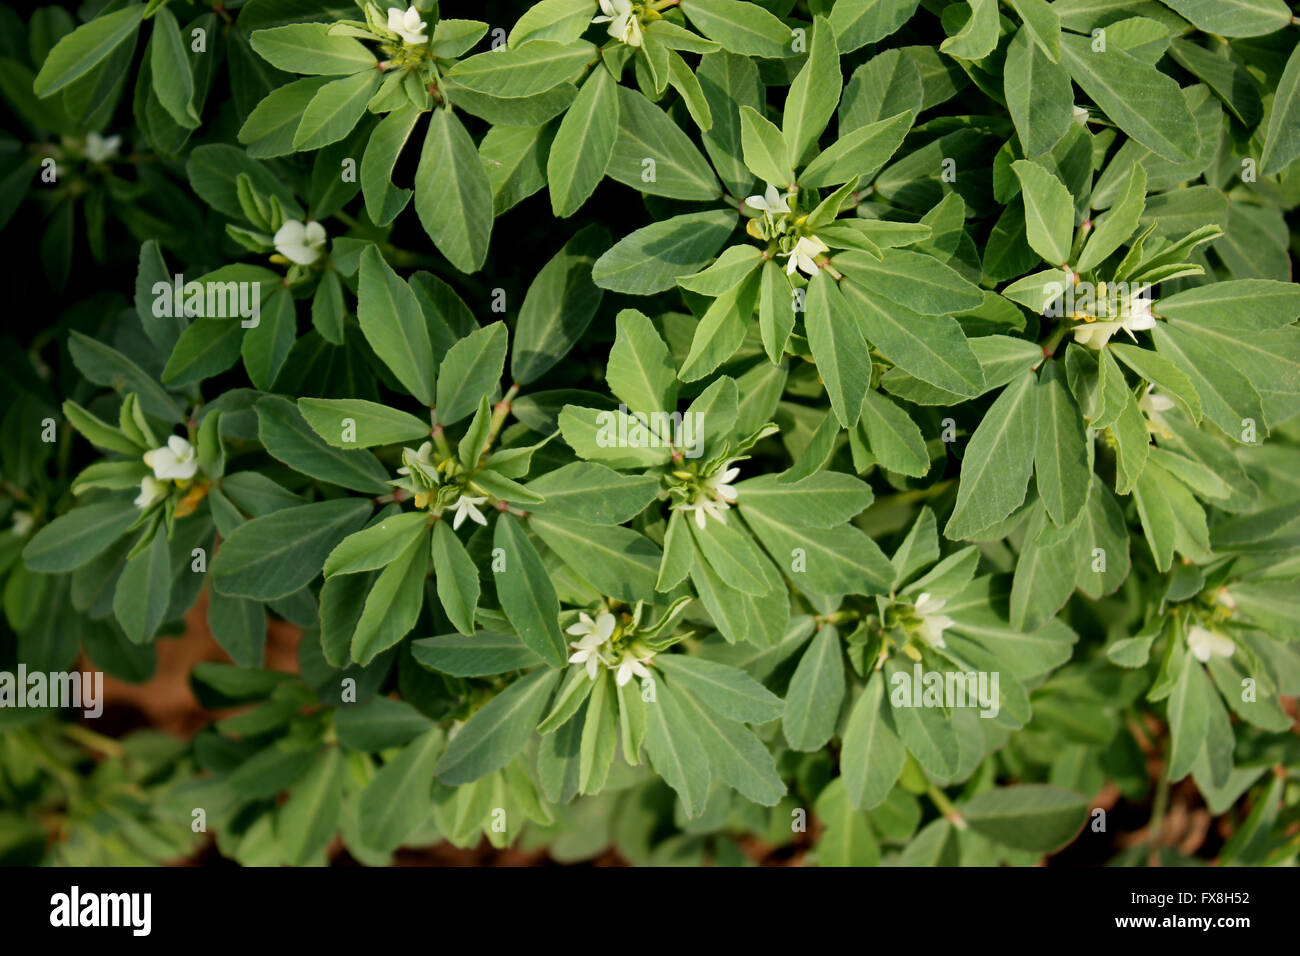 Fenugreek, Trigonella foenum-graecum, cultivated annual herb with trifoliate compound leaves, used as vegetable, seeds a spice Stock Photo